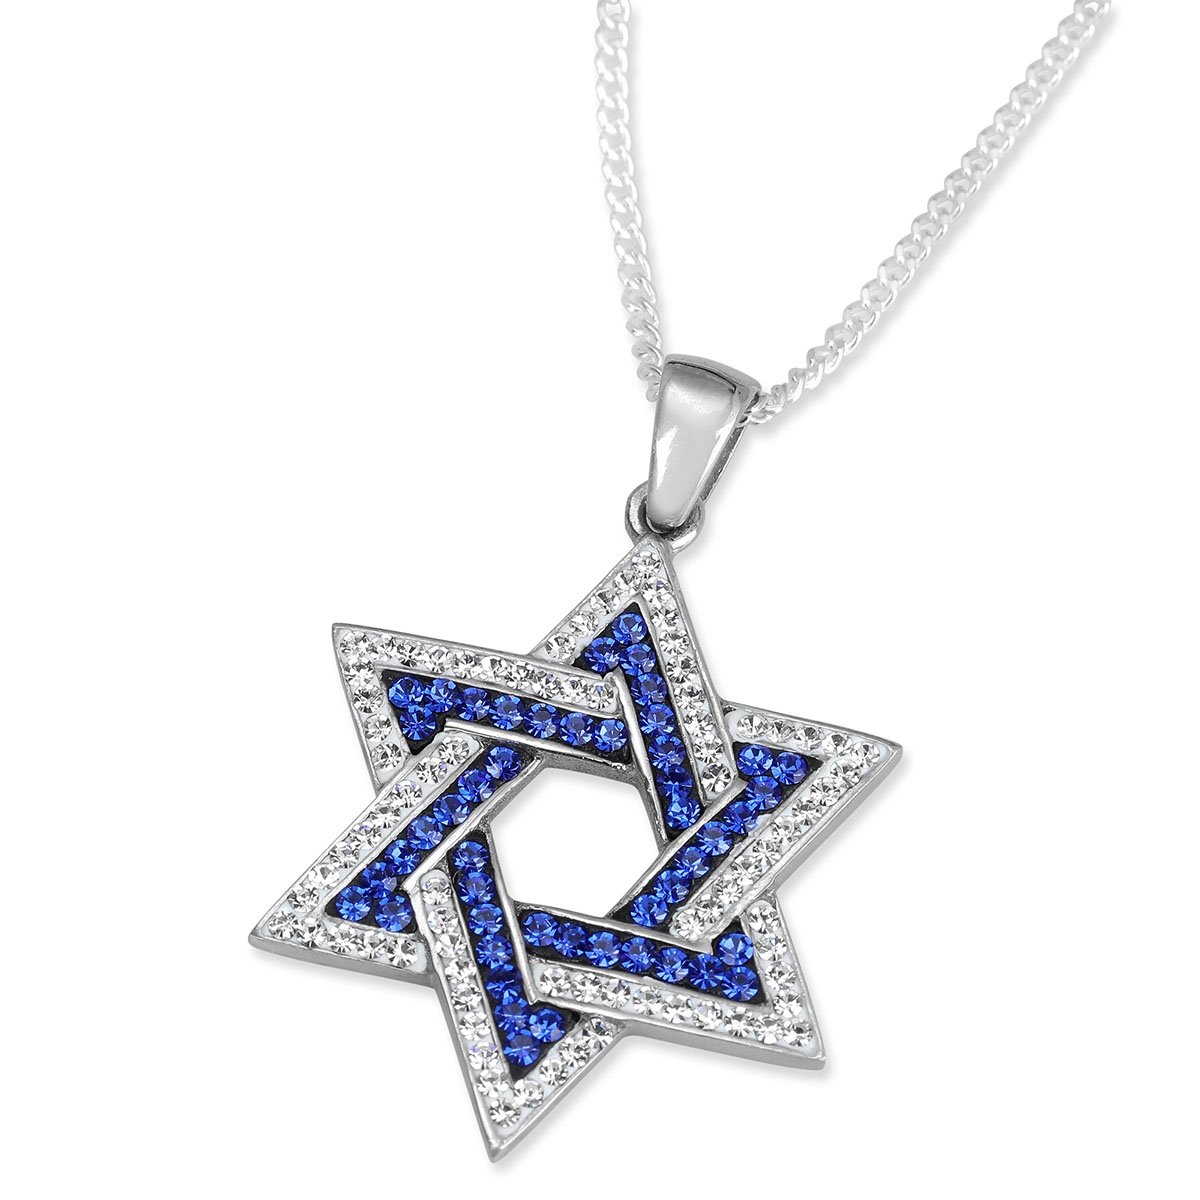 925 Sterling Silver Interlocked Star of David Pendant With Blue and White Crystal Stones - 1